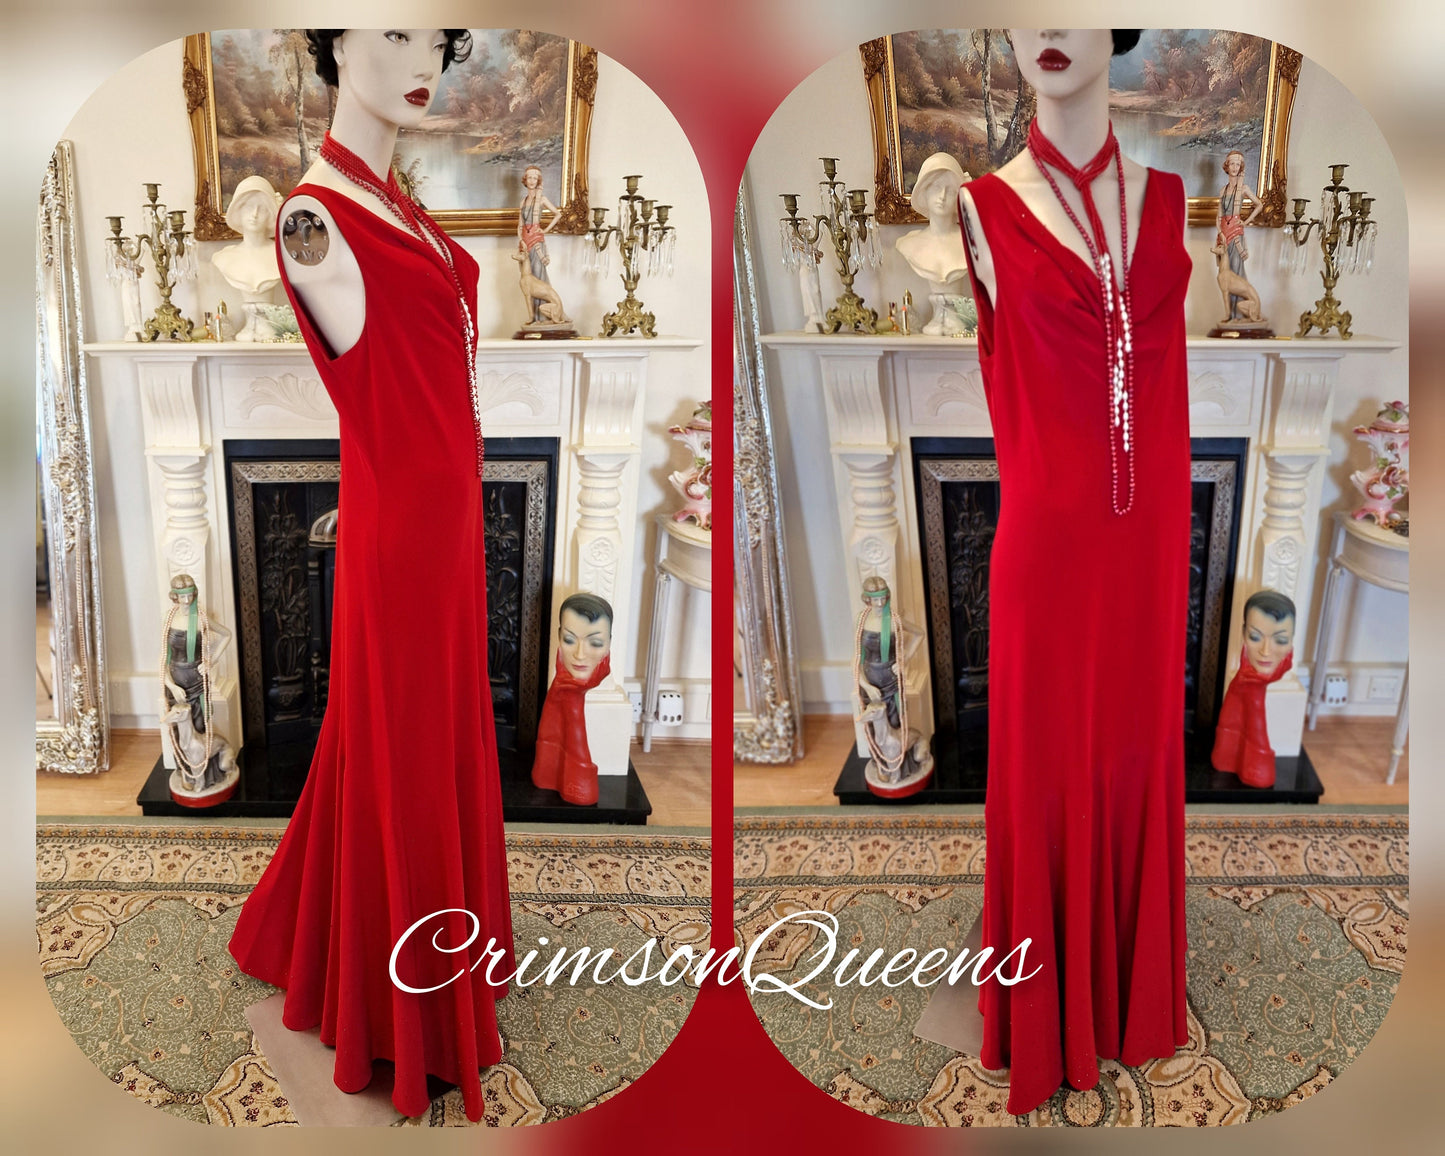 Art Deco romantic Downton Abbey vintage scarlet red embellished beaded  cocktail evening ballgown floor dress Size UK 20 US 16